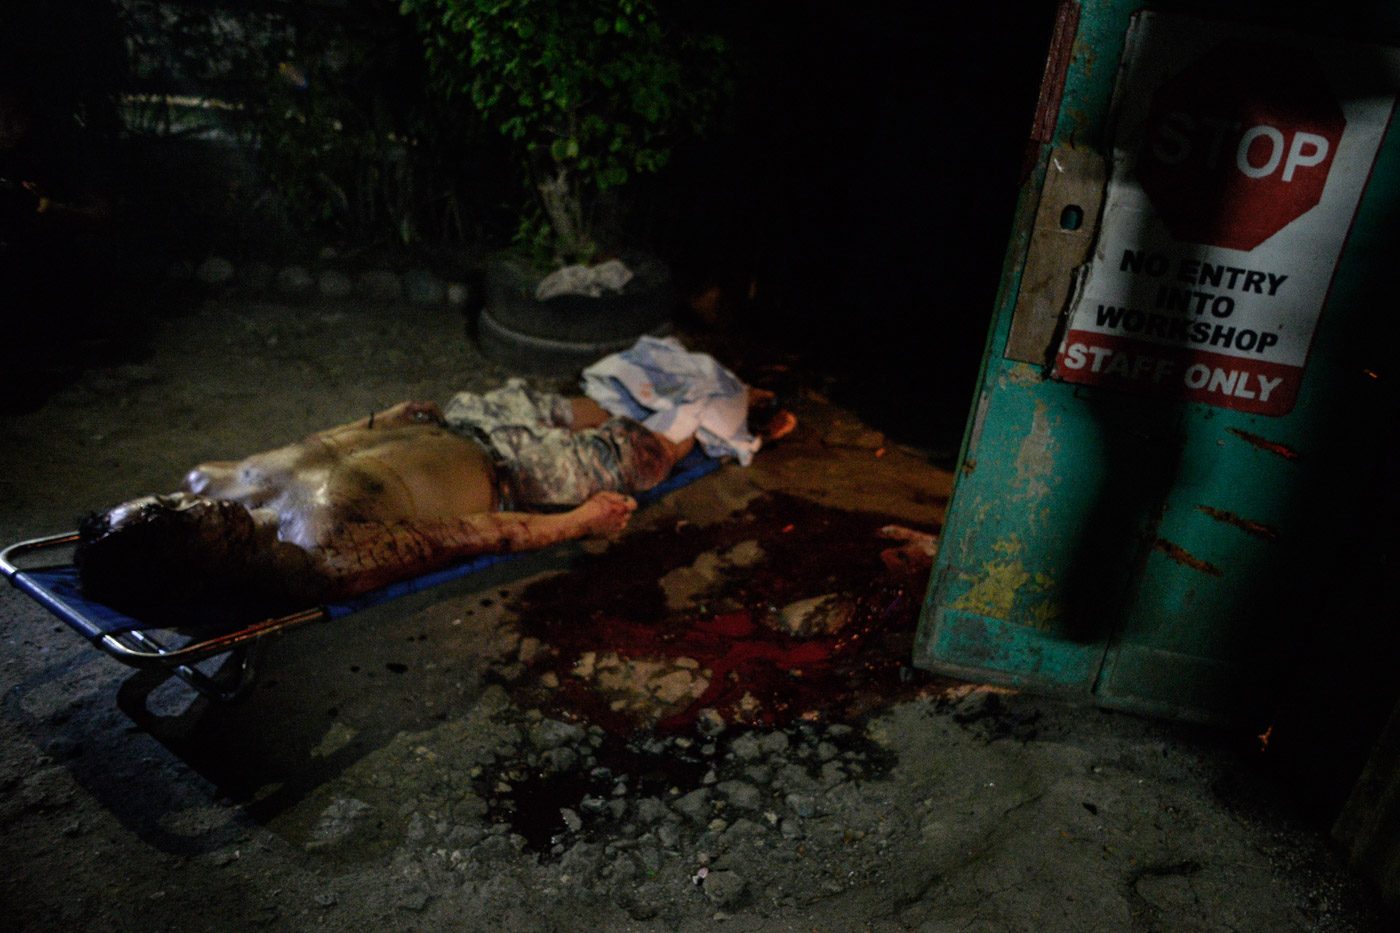 1 AM. Donald Pallarco is shot to death in Kawit, Cavite after he draws his .38 caliber pistol at a police officer who poses as a buyer. Photo by LeAnne Jazul/Rappler  